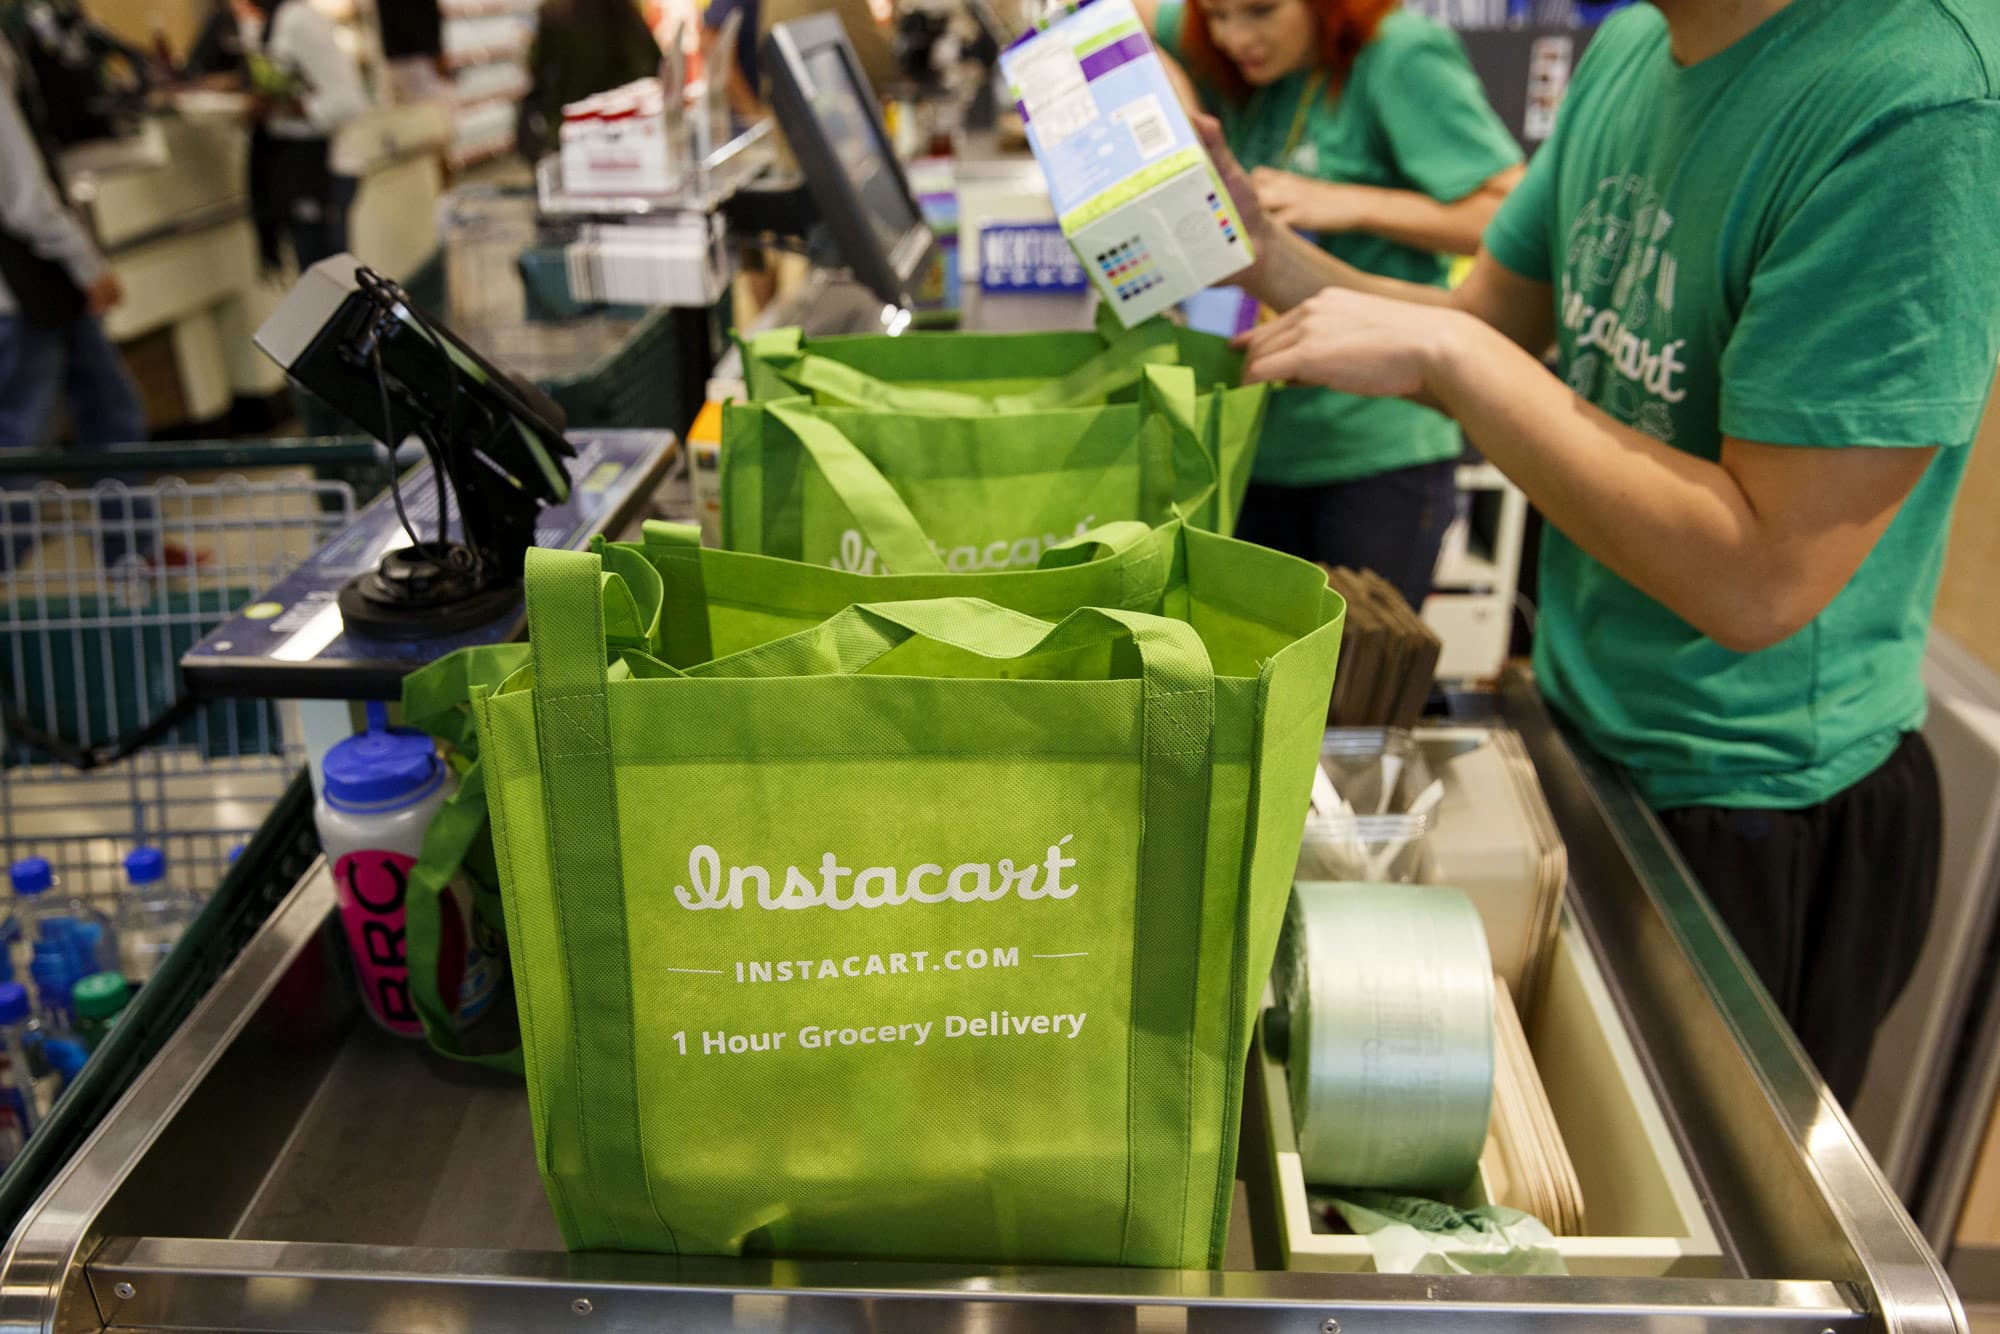 ends Instacart partnership with Whole Foods - The Verge